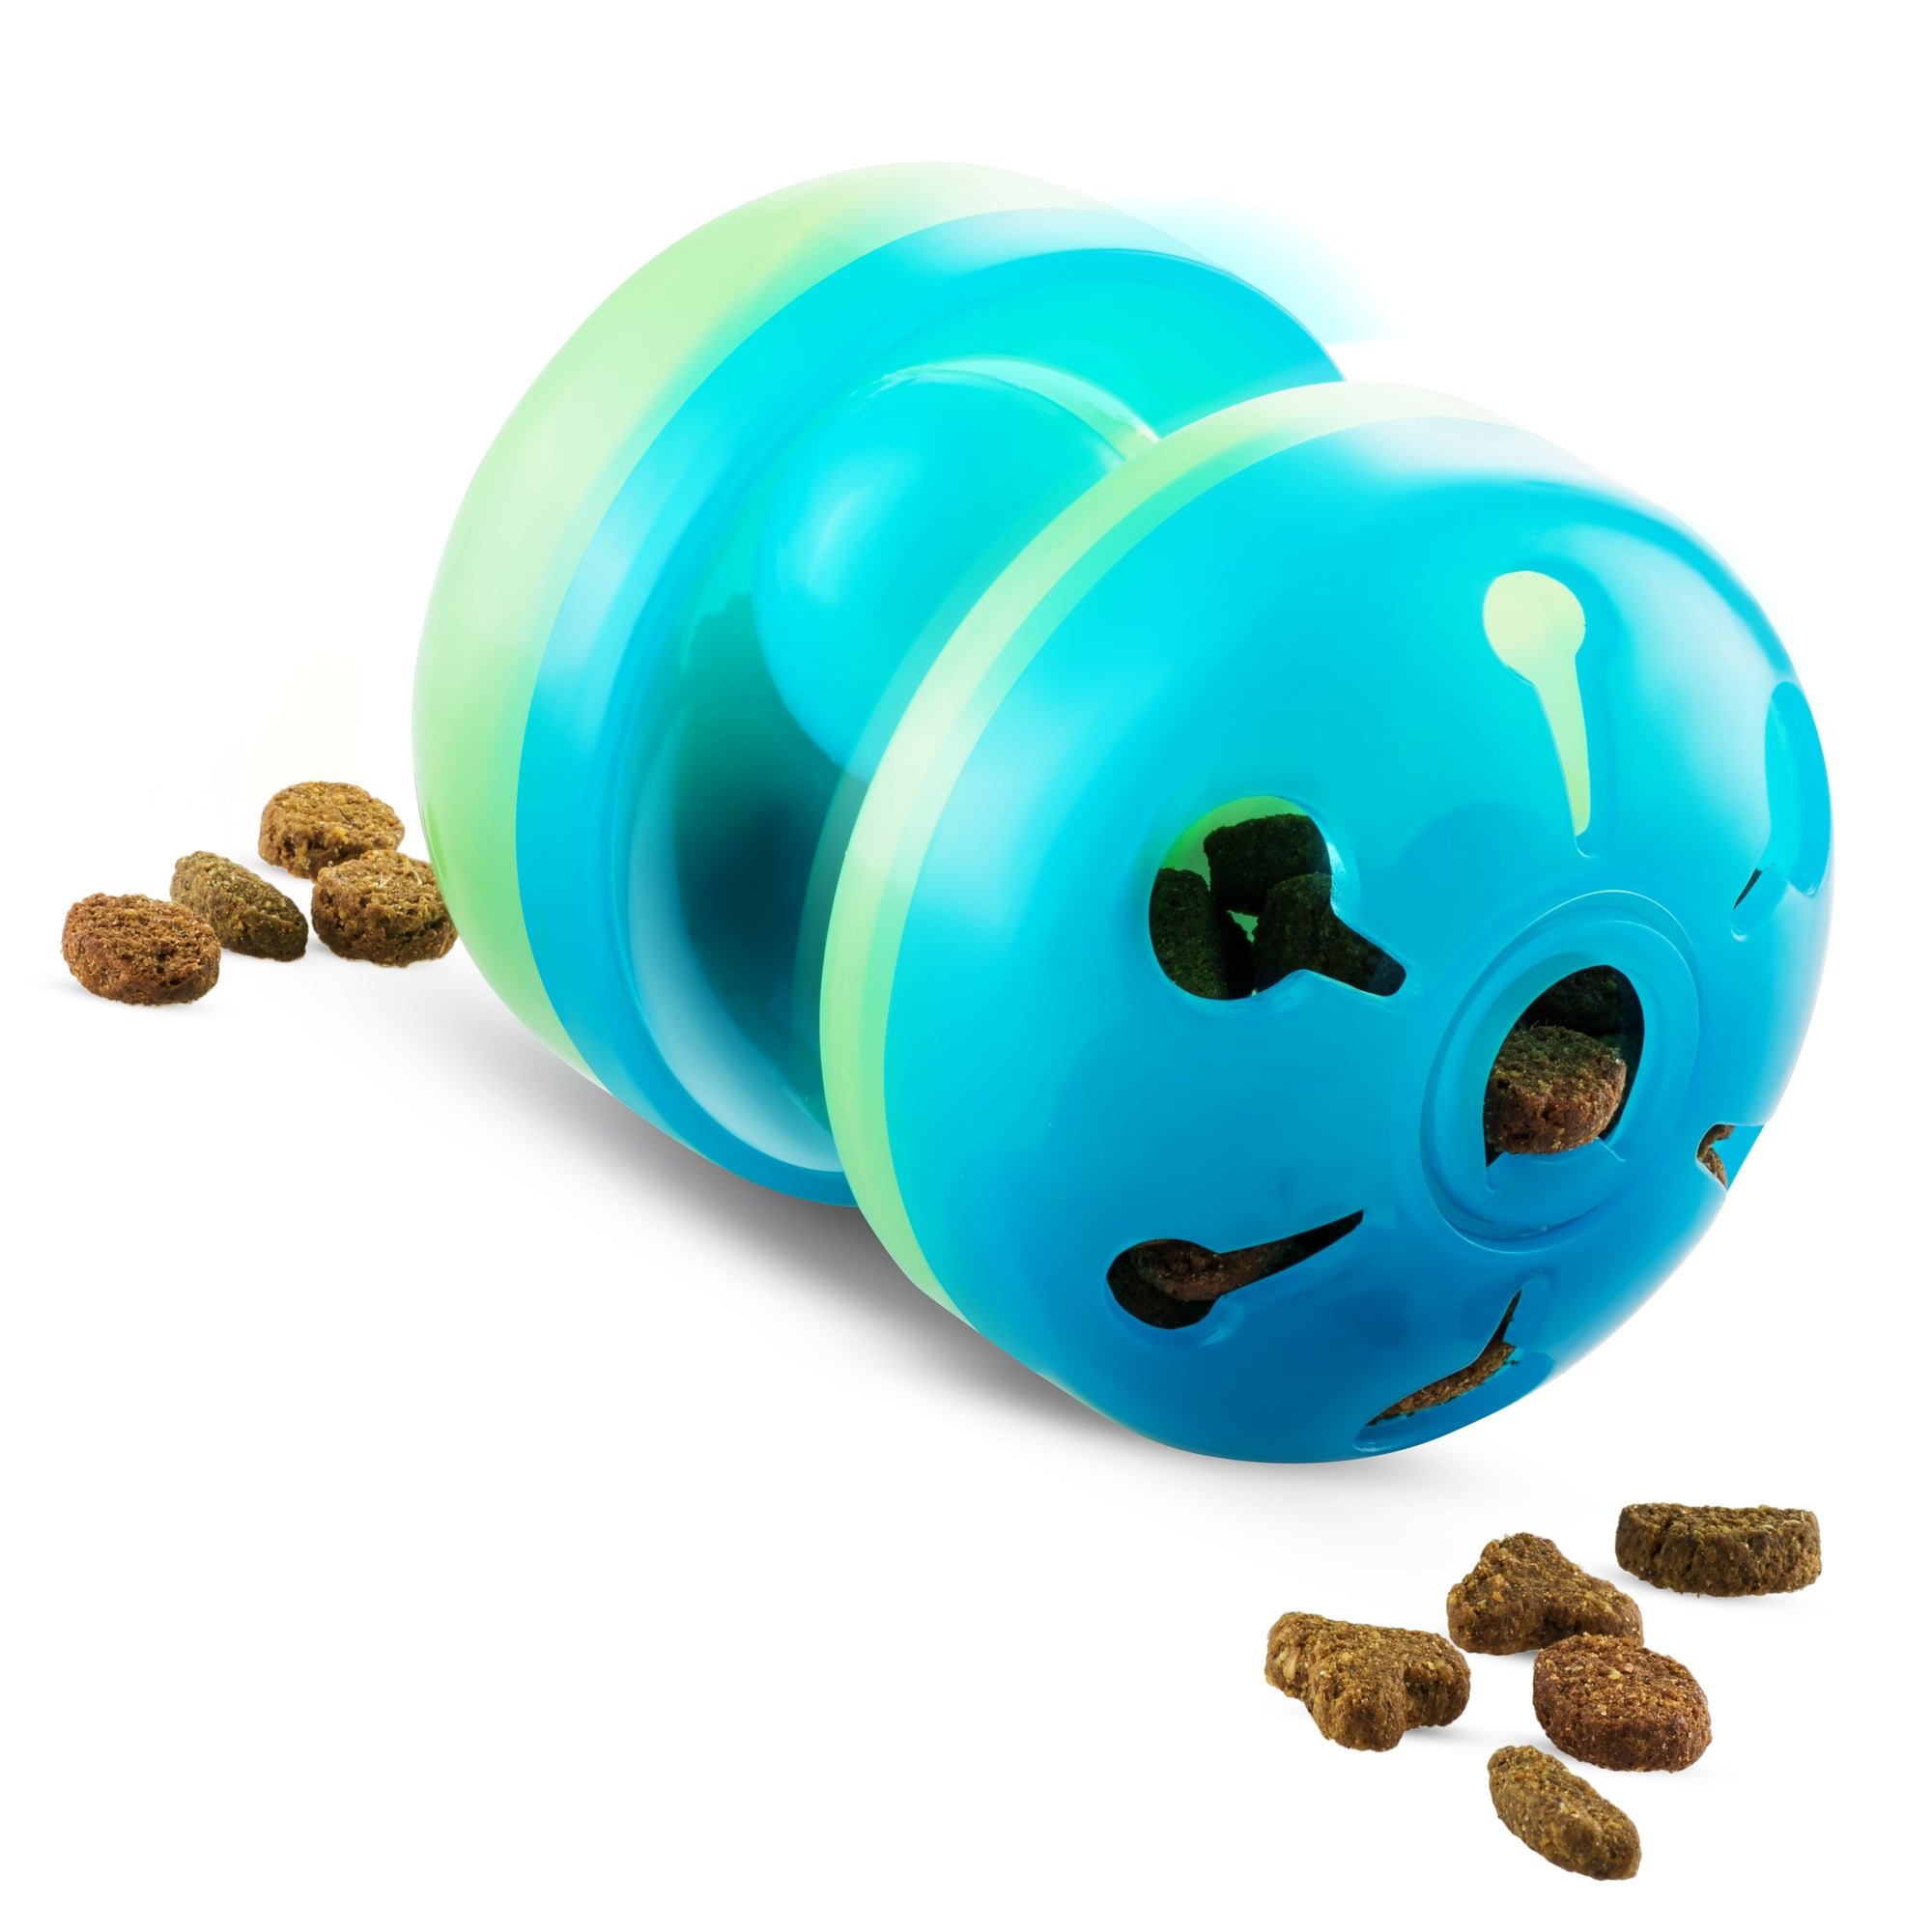 https://boshel.com/cdn/shop/products/Cat-Meal-Dispensing-Toy-by-BOSHEL-Help-Problematic-Eating-Behaviors-with-the-Cat-Food-Toy-Encourage-Critical-Thinking-through-the-Cat-Meal-Toy-Cat-Food-Dispenser-Stops-Quick-Eating-Ha_becebda6-8c6b-4371-94c7-2d91204d1c4e_2000x.jpg?v=1605589086